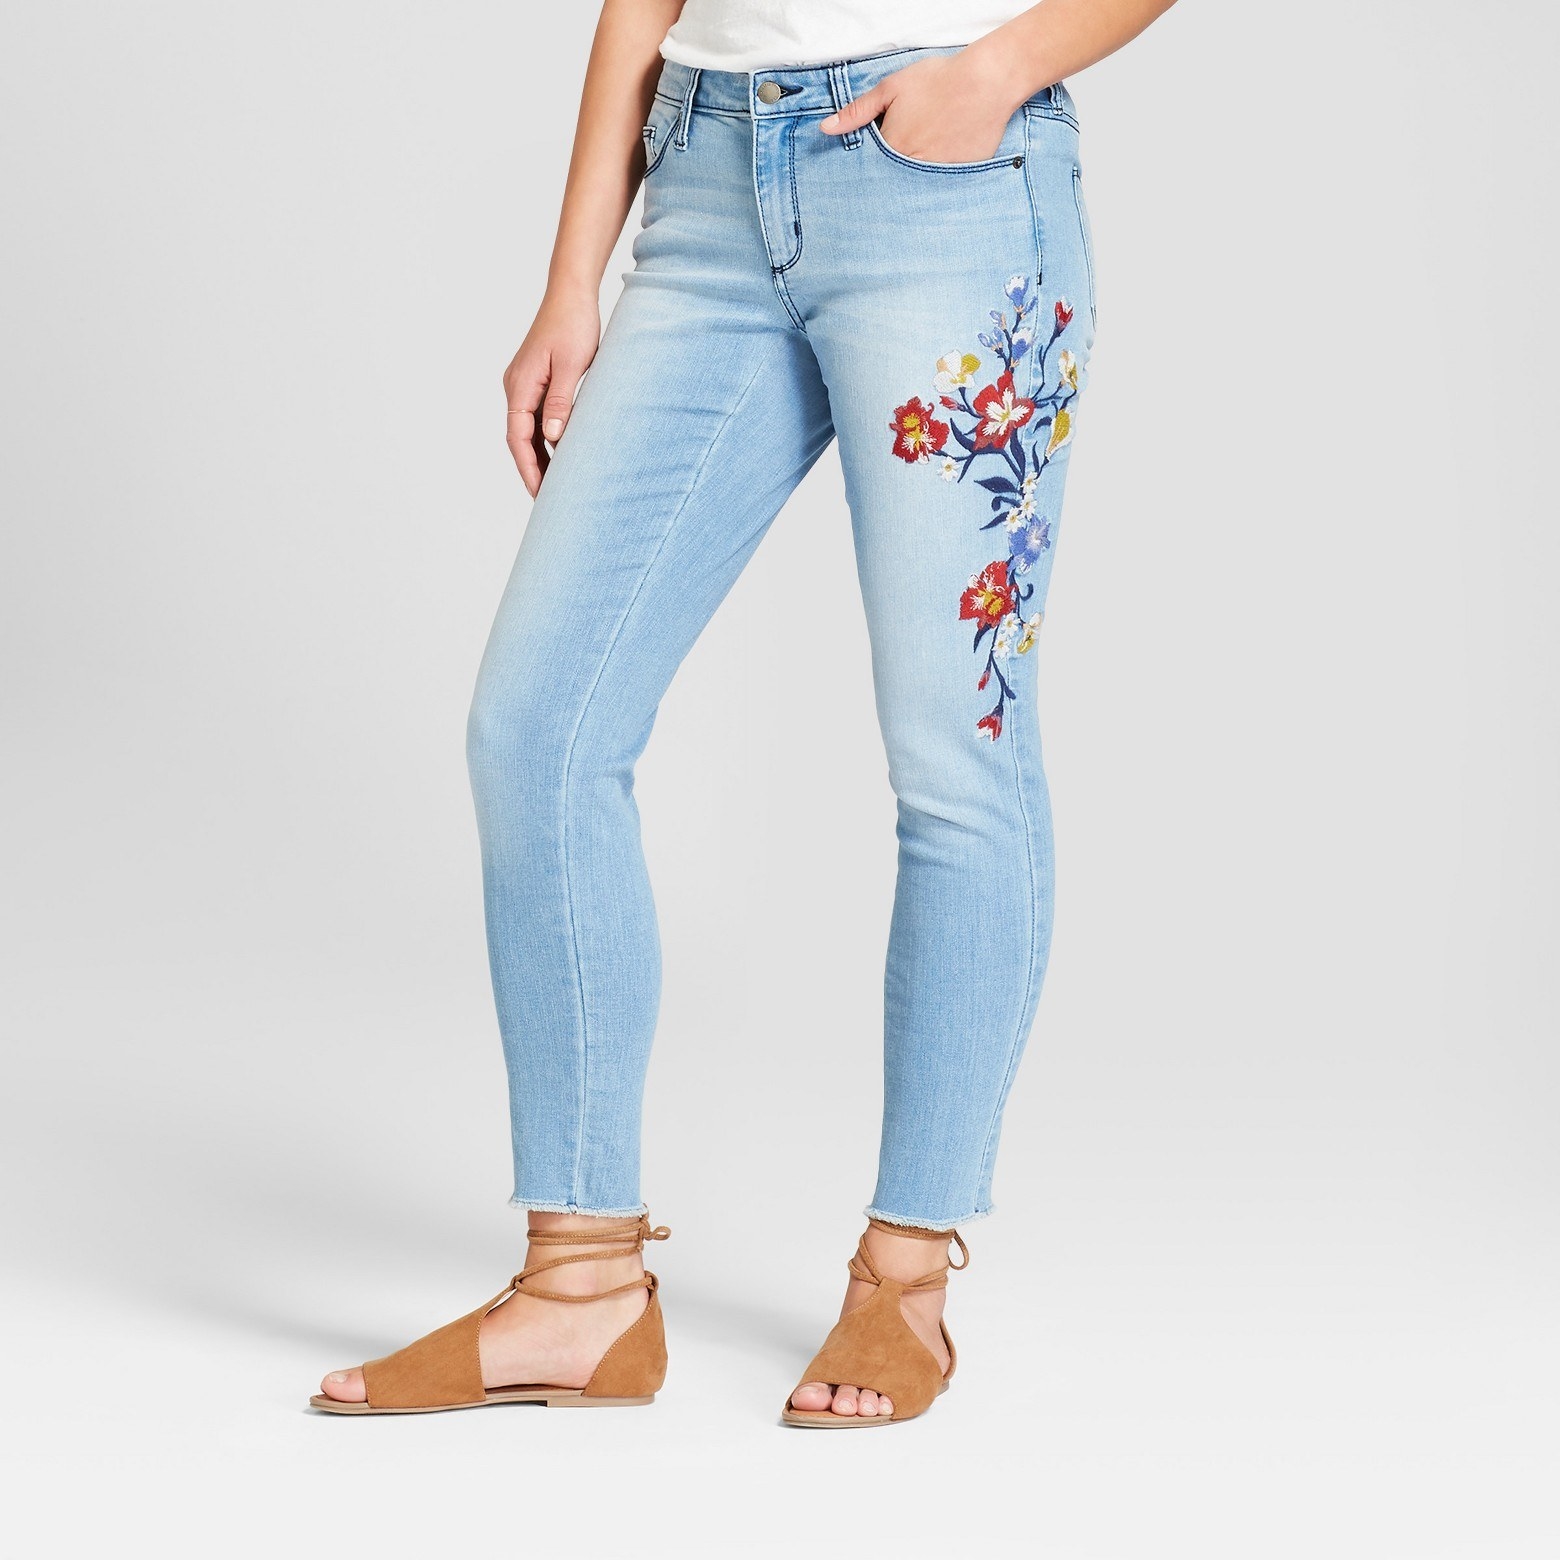 Target's New Denim Line Is Affordable, Inclusive, And Looks Good On ...